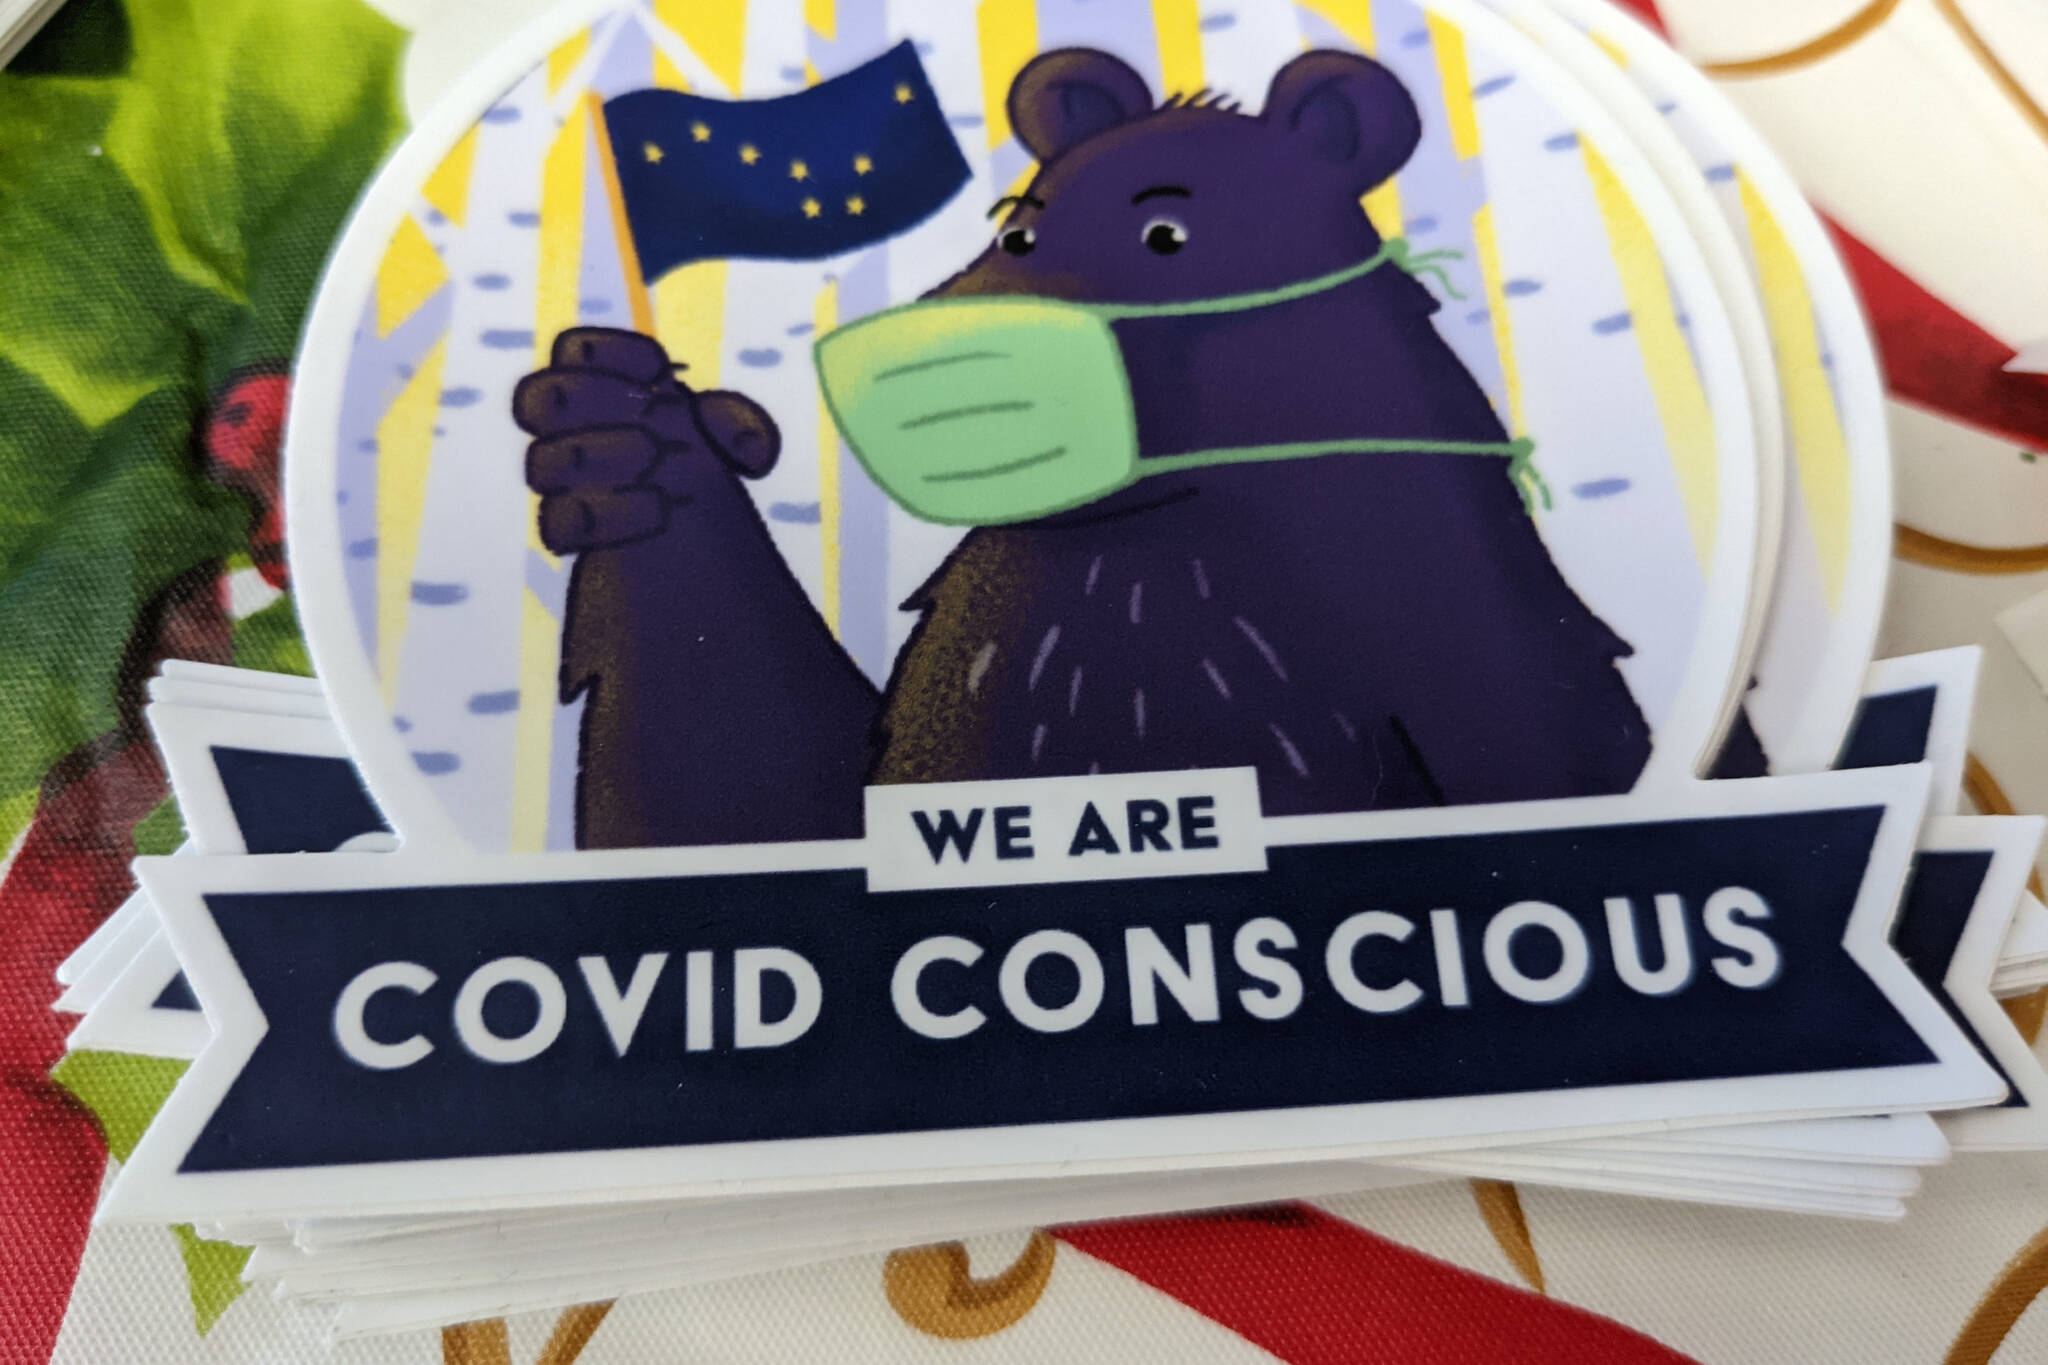 A sticker promoting COVID mitigation measures is photographed at a COVID-19 vaccination clinic in Soldotna, Alaska, on Tuesday, Nov. 30, 2021. (Clarion file)